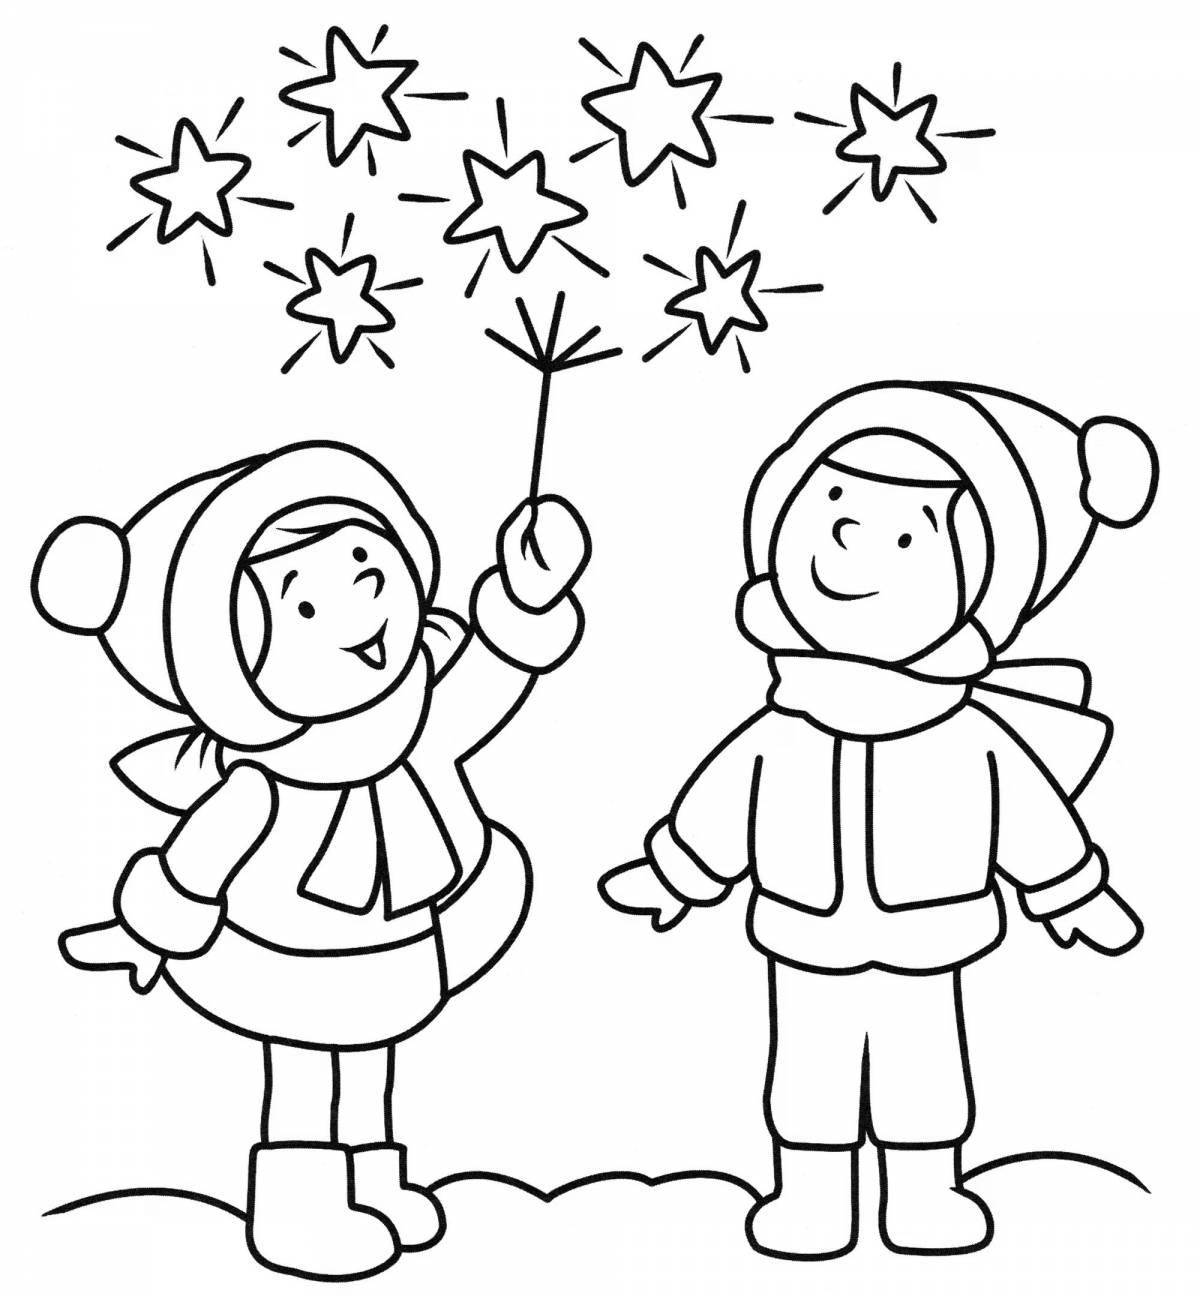 Amazing winter coloring book for boys